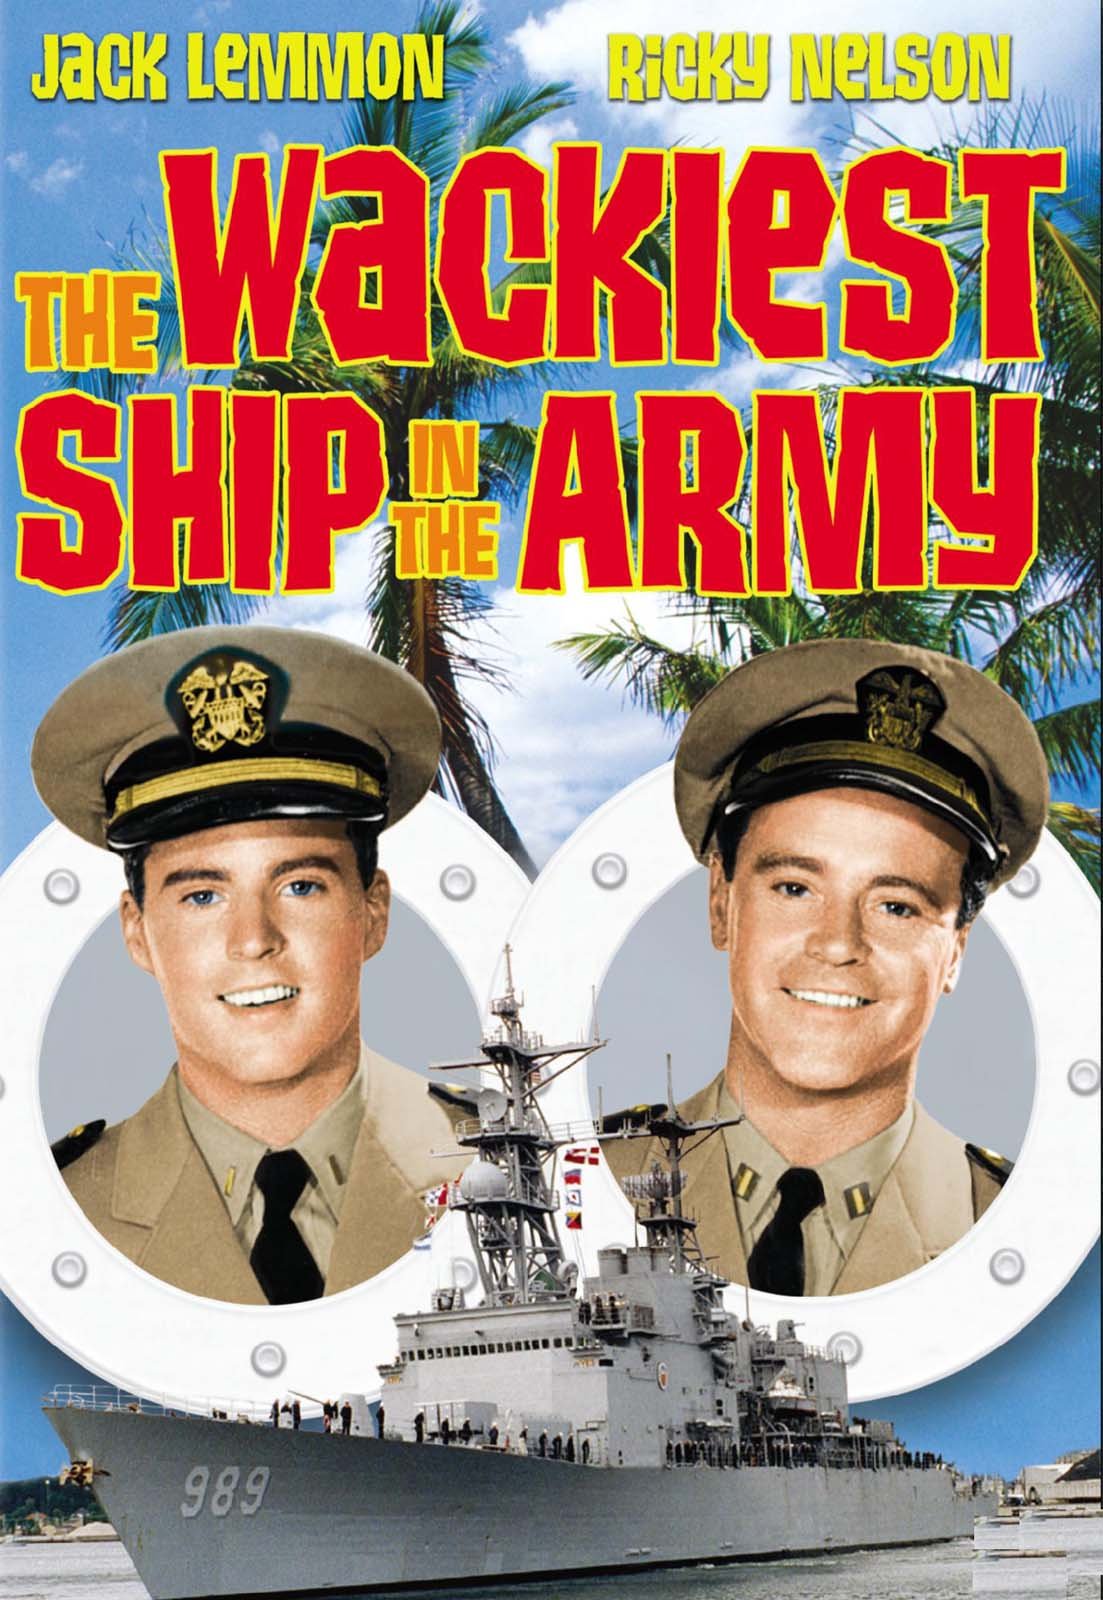 The Wackiest Ship in the Army (1960) starring Jack Lemmon, Ricky Nelson